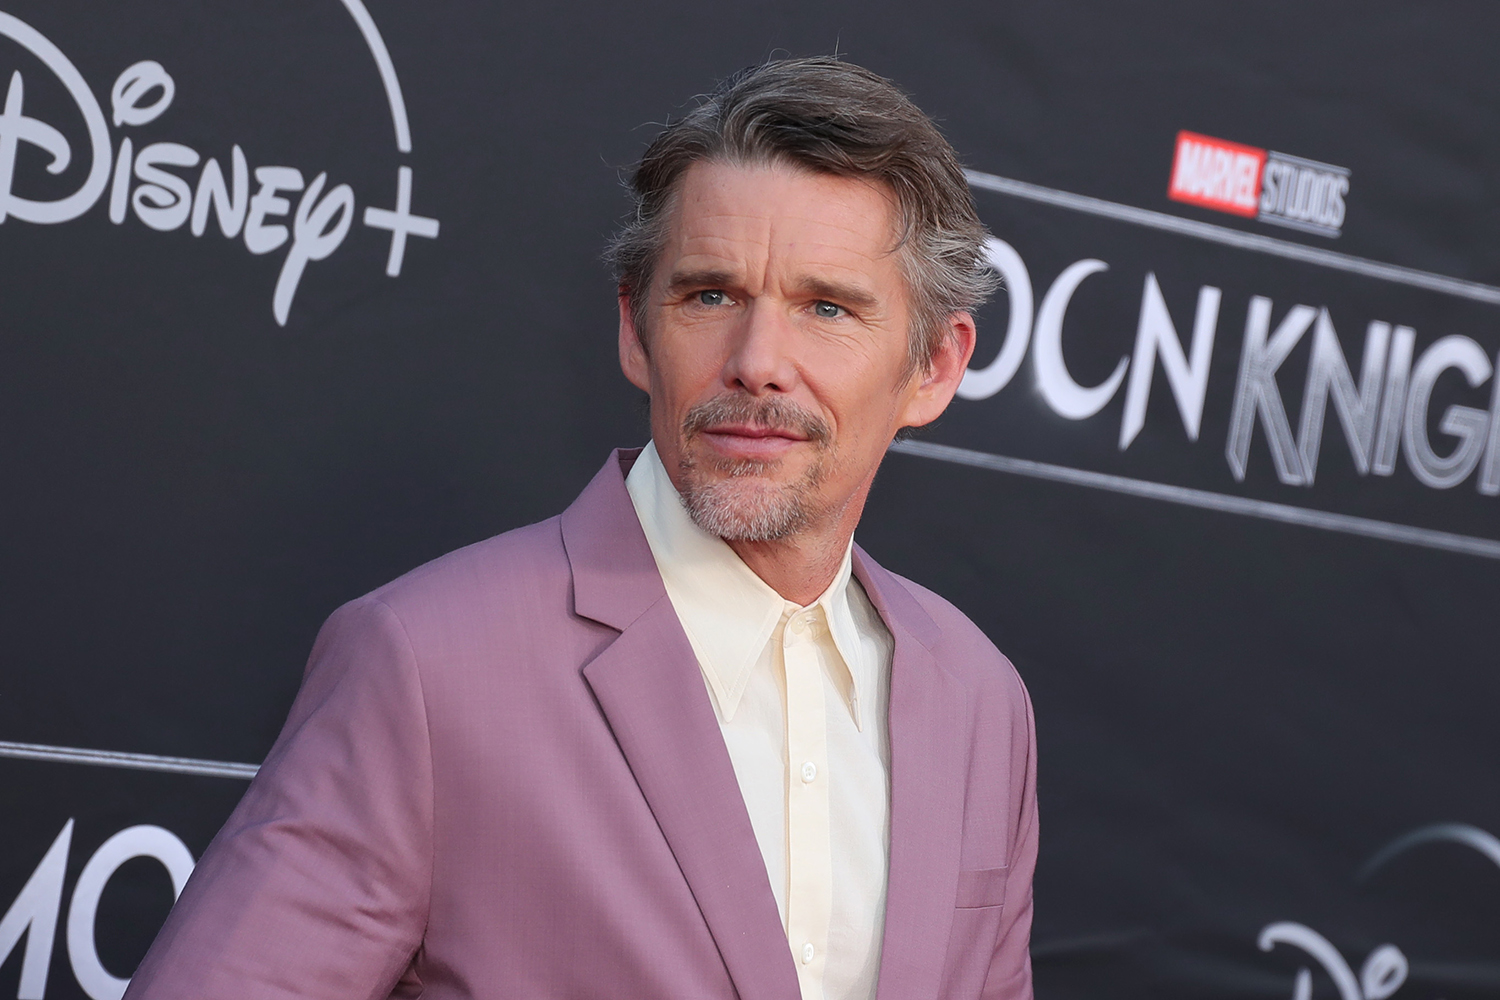 Ethan Hawke, who plays The Grabber in The Black Phone, attends the Moon Knight premiere